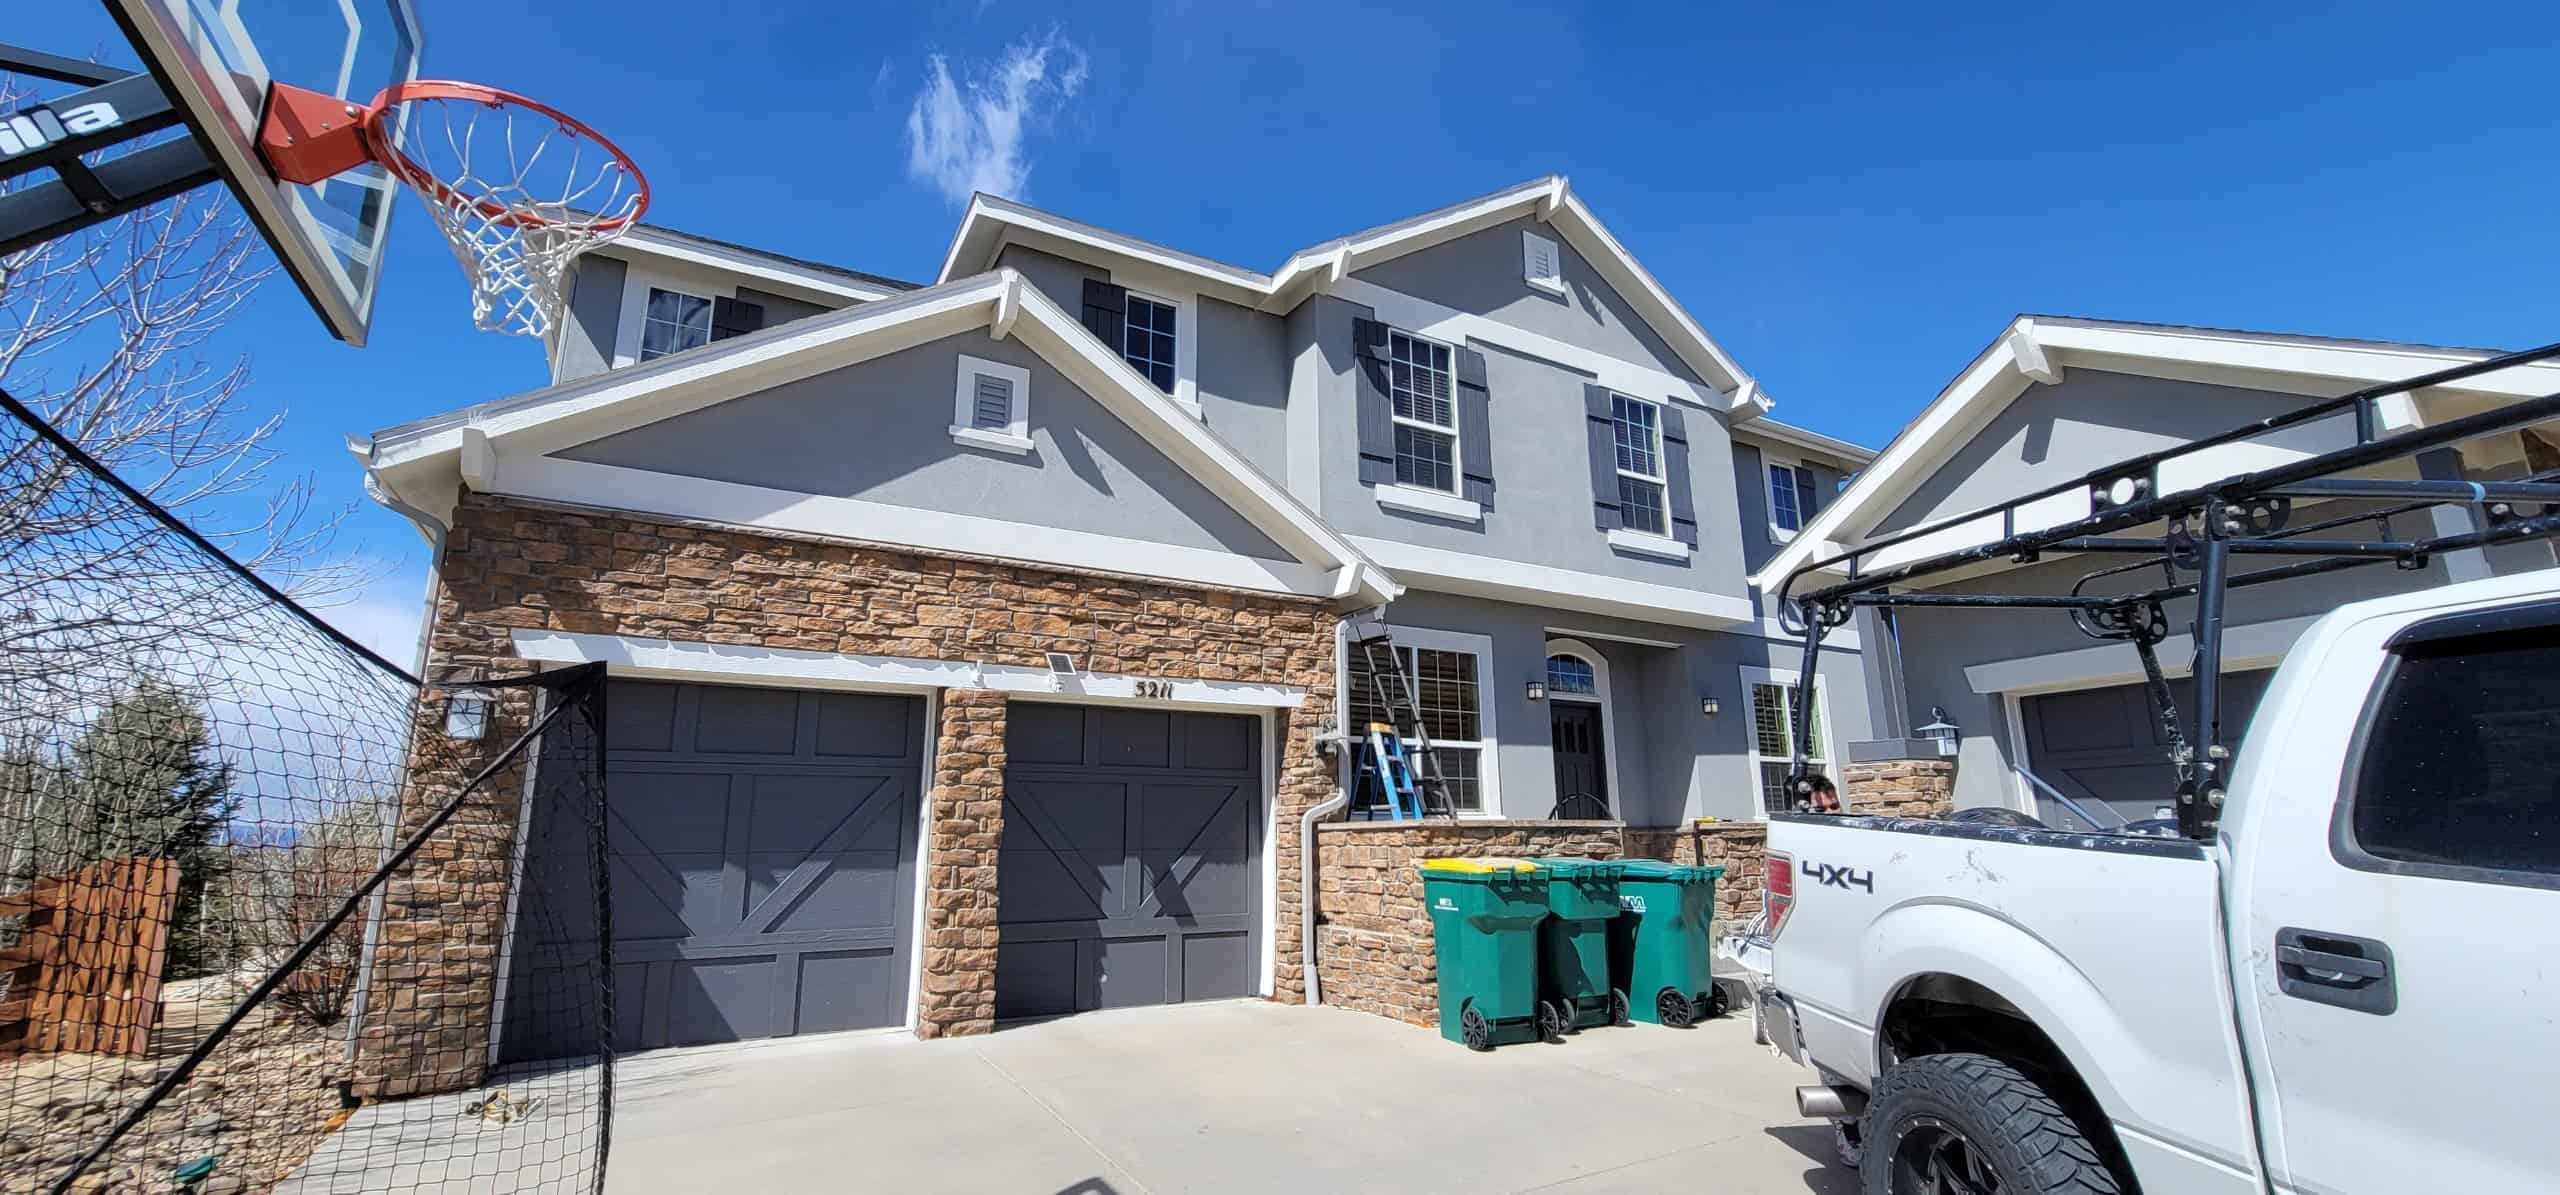 Newly Painted House Exterior with Garage and Driveway- painting services in Erie, CO